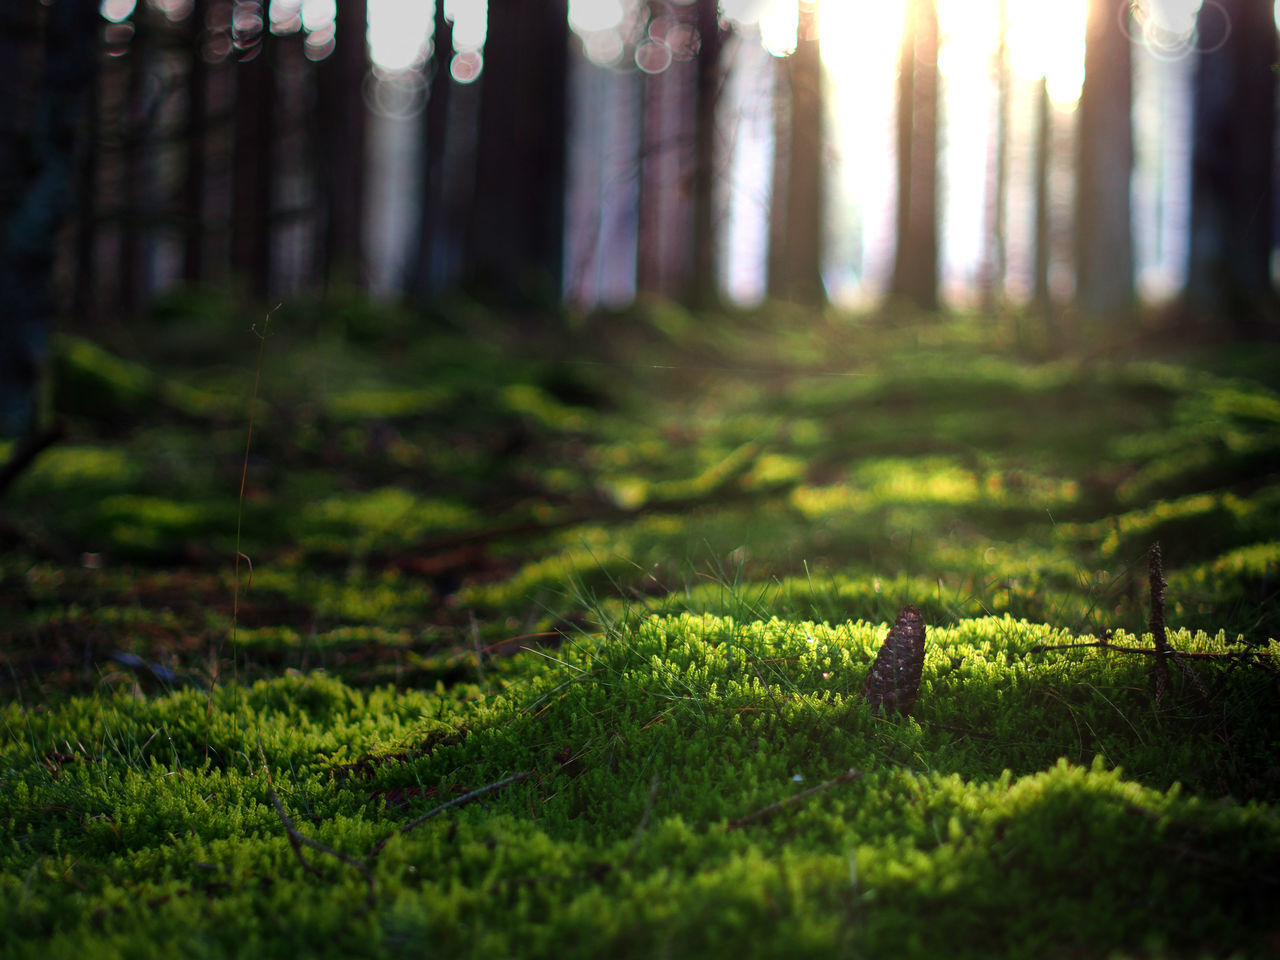 plant, green, sunlight, forest, land, tree, nature, grass, natural environment, woodland, environment, beauty in nature, leaf, light, tranquility, landscape, tree trunk, trunk, no people, morning, growth, sunbeam, sun, outdoors, scenics - nature, coniferous tree, tranquil scene, pinaceae, pine woodland, selective focus, pine tree, autumn, moss, summer, sky, fog, back lit, non-urban scene, day, plant part, environmental conservation, field, idyllic